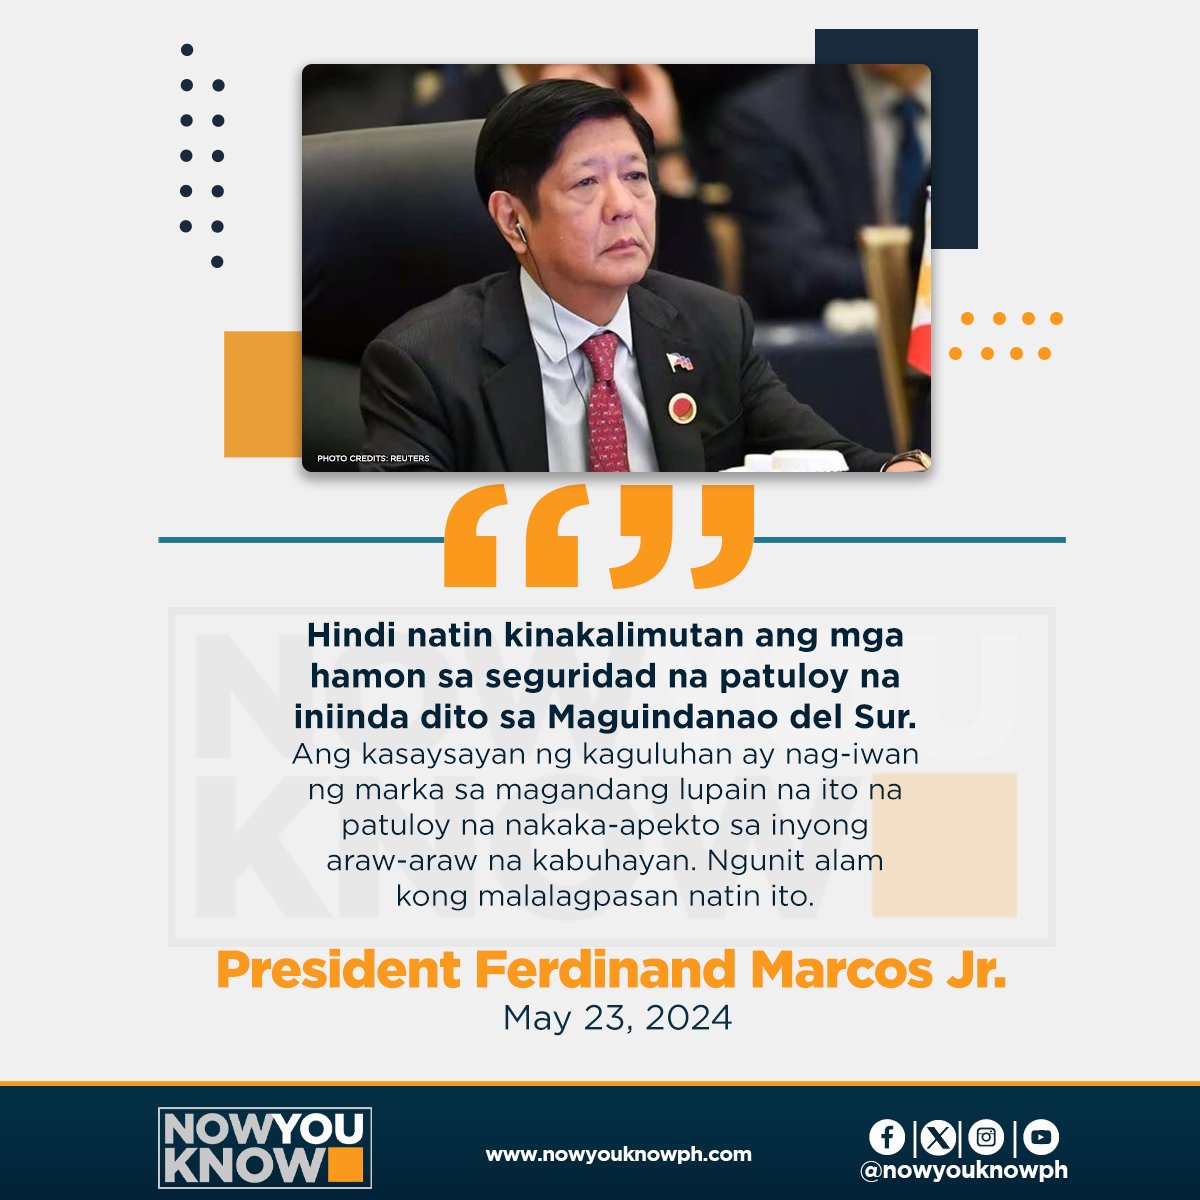 President Ferdinand Marcos Jr. said on Thursday that security remains at the top of his administration’s priorities. READ : tinyurl.com/4w8rwhuz 📰Inquirer.net